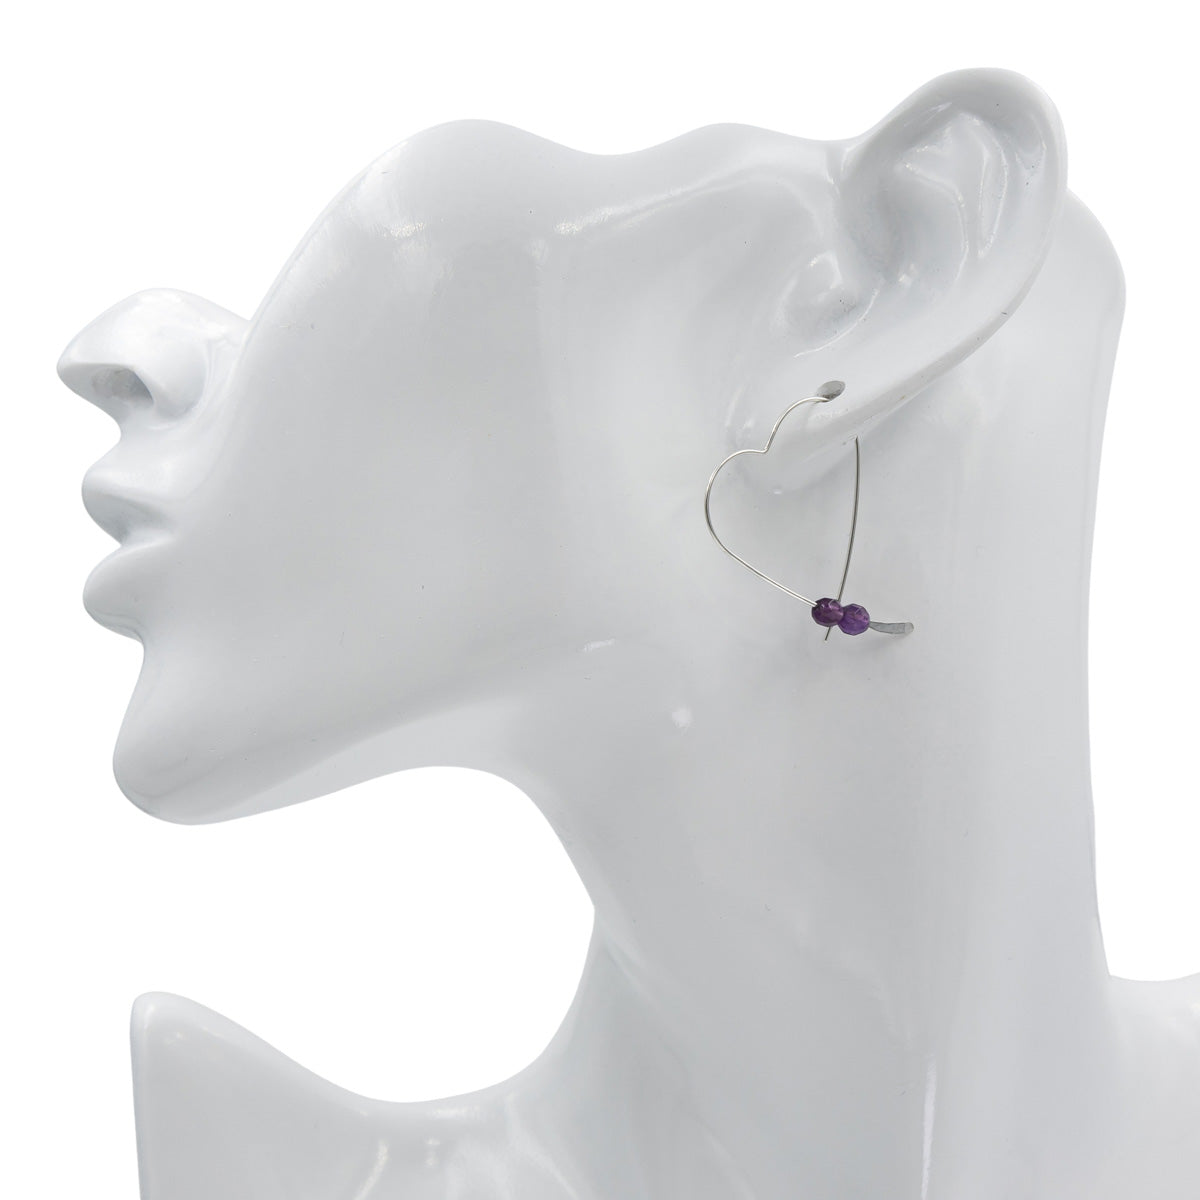 Earth Song Jewelry Handmade Sterling Silver Heart Earrings with faceted Amethyst stones on mannequin head